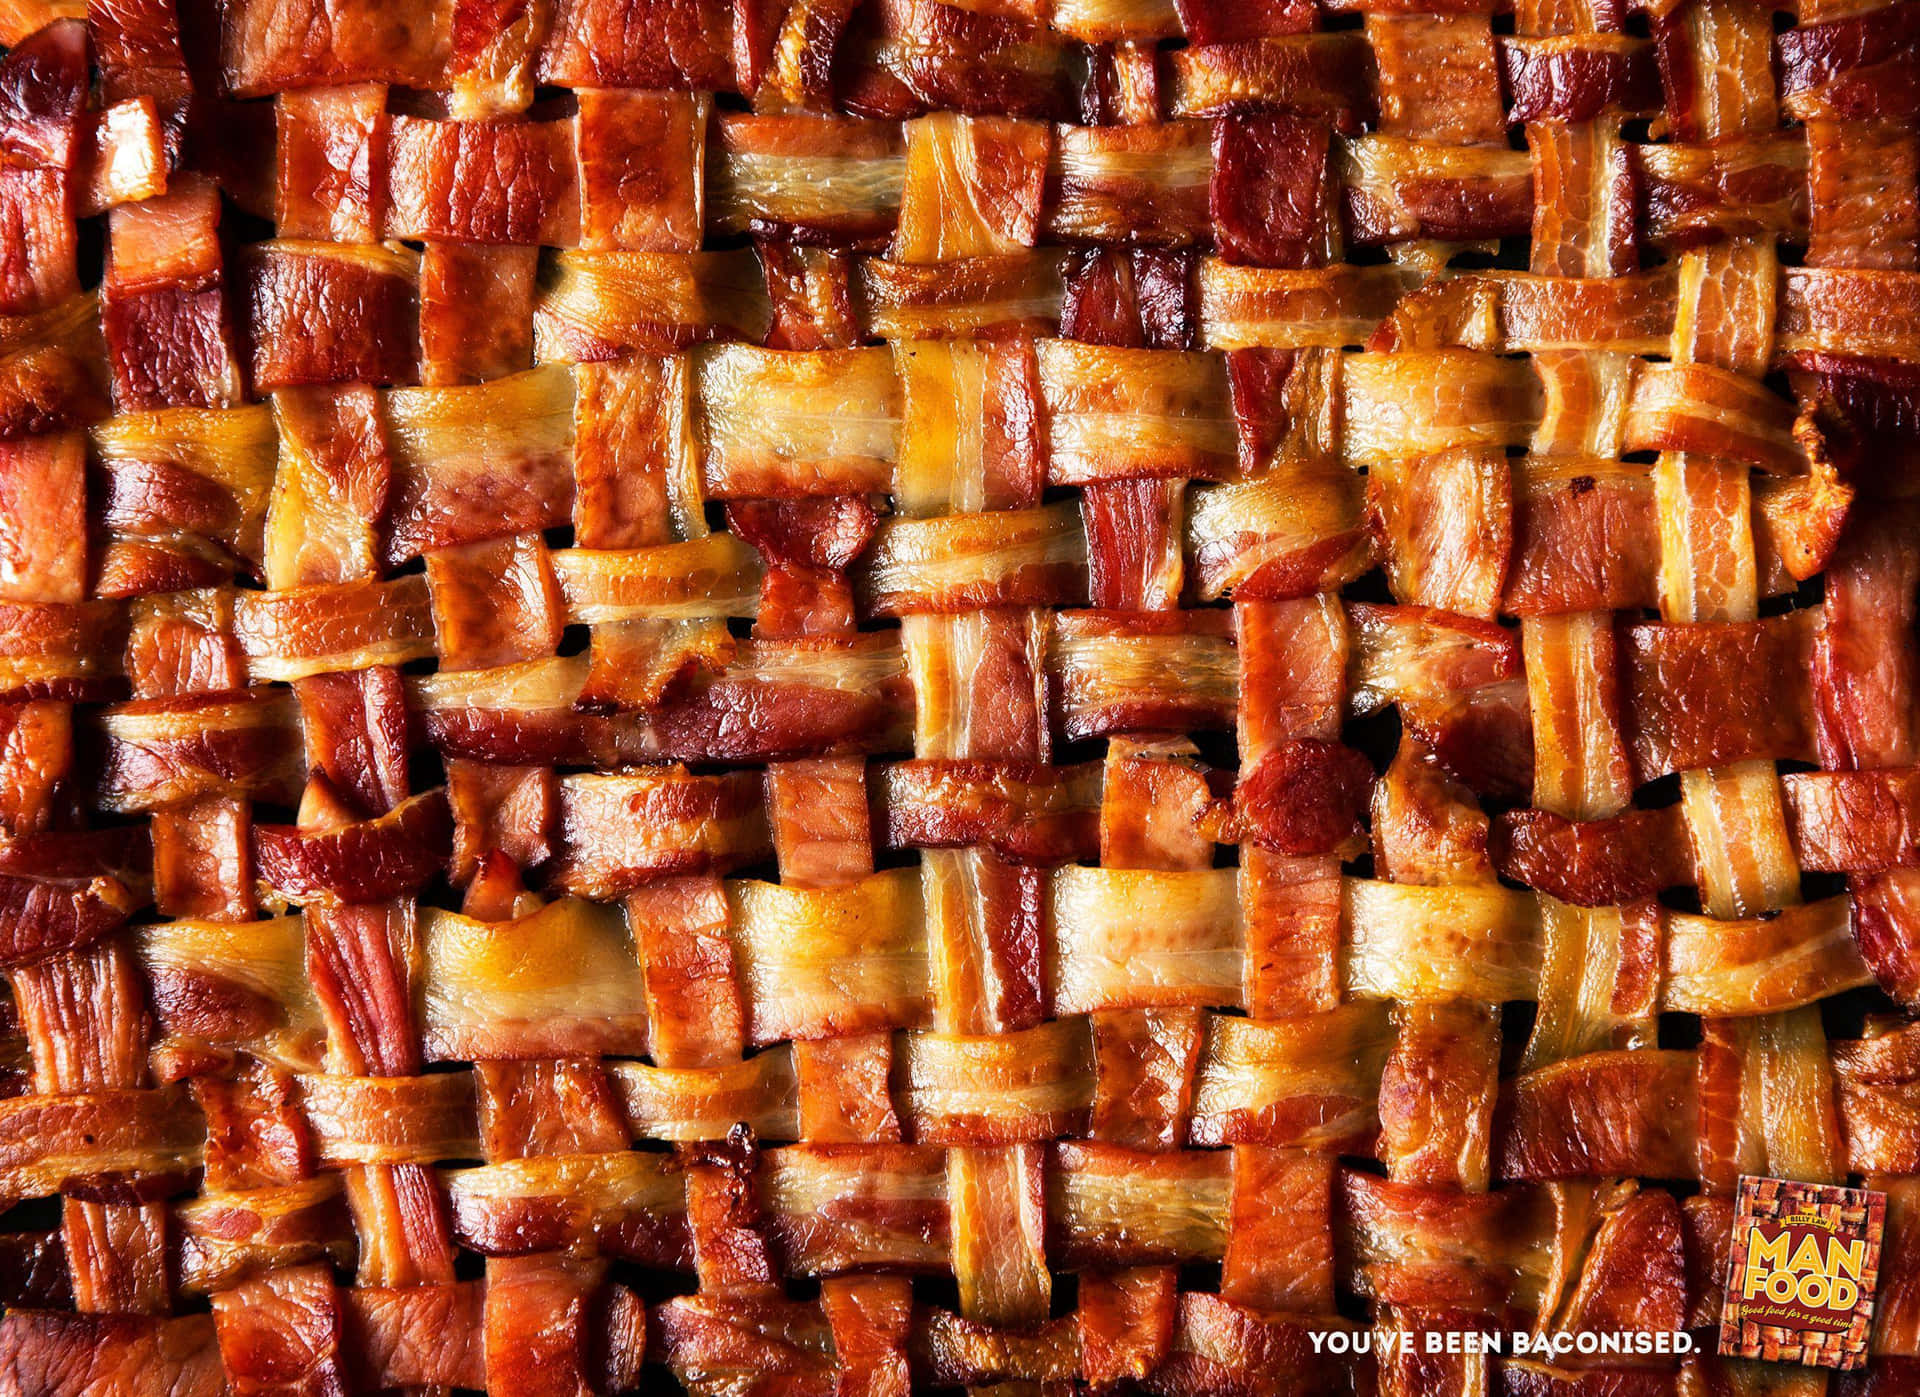 This bacon is cooked to perfection! #bacon #breakfast